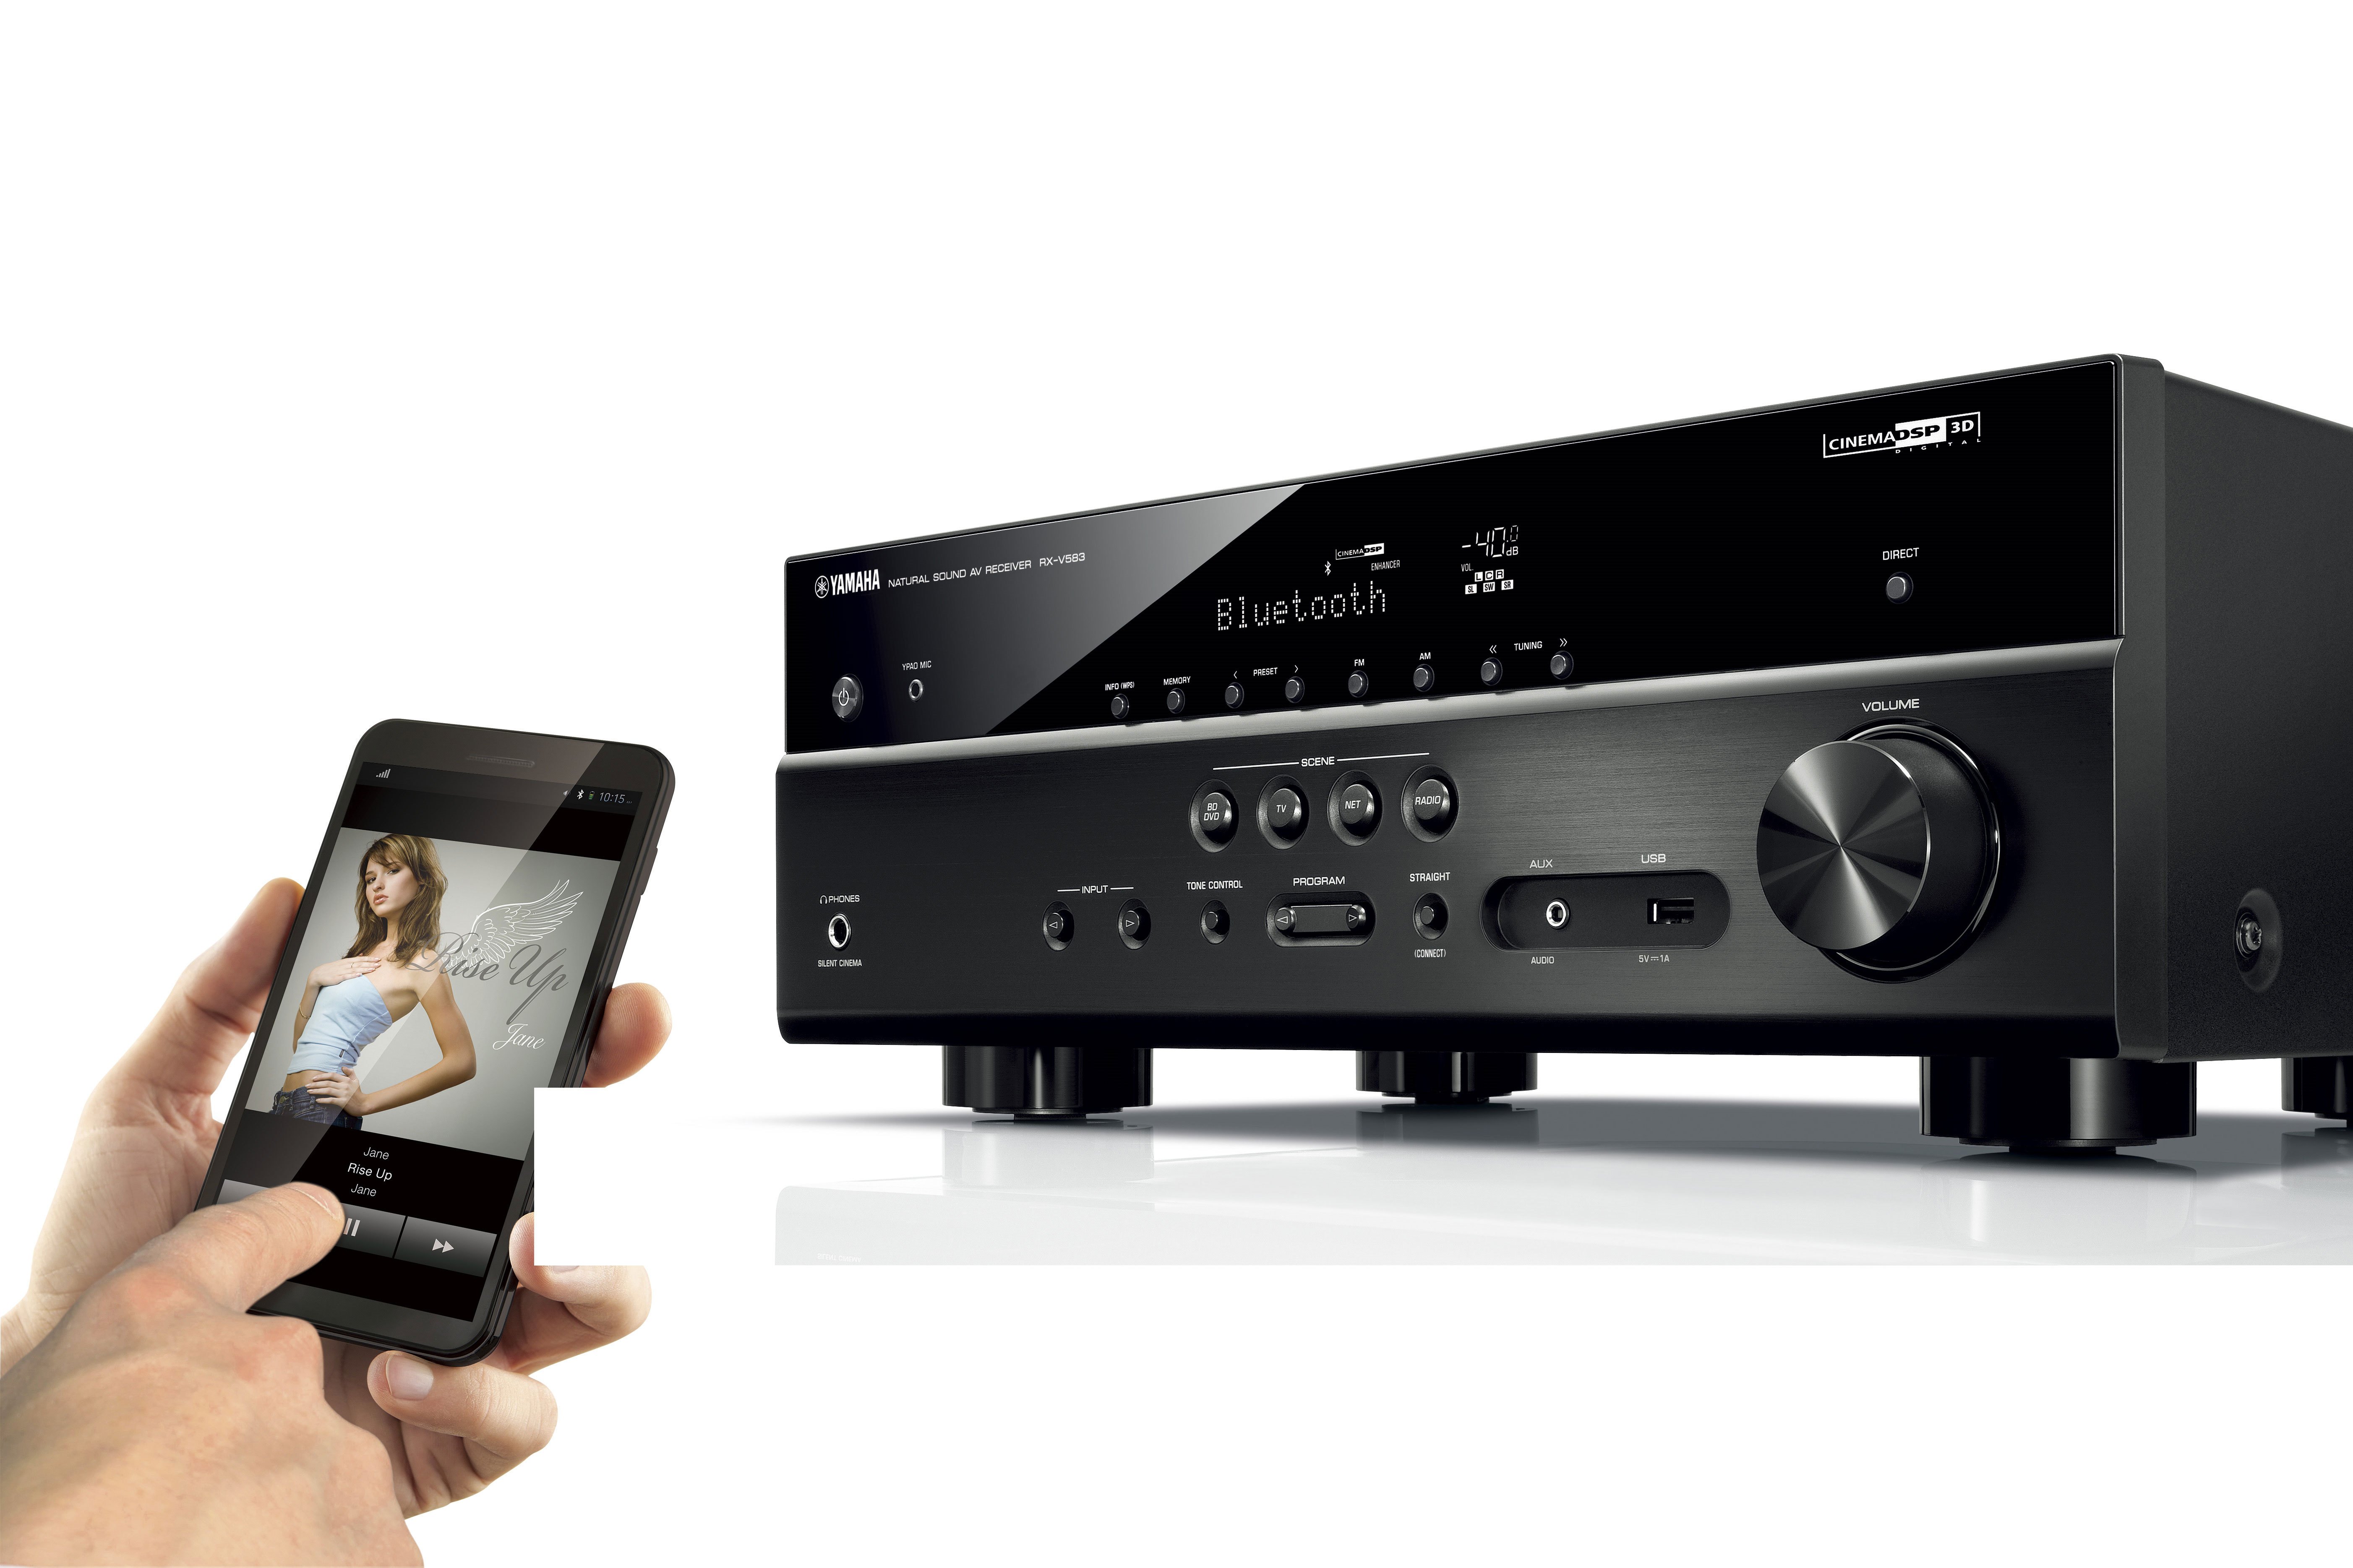 RX-V583 - Overview - AV Receivers - Audio & Visual - Products ...